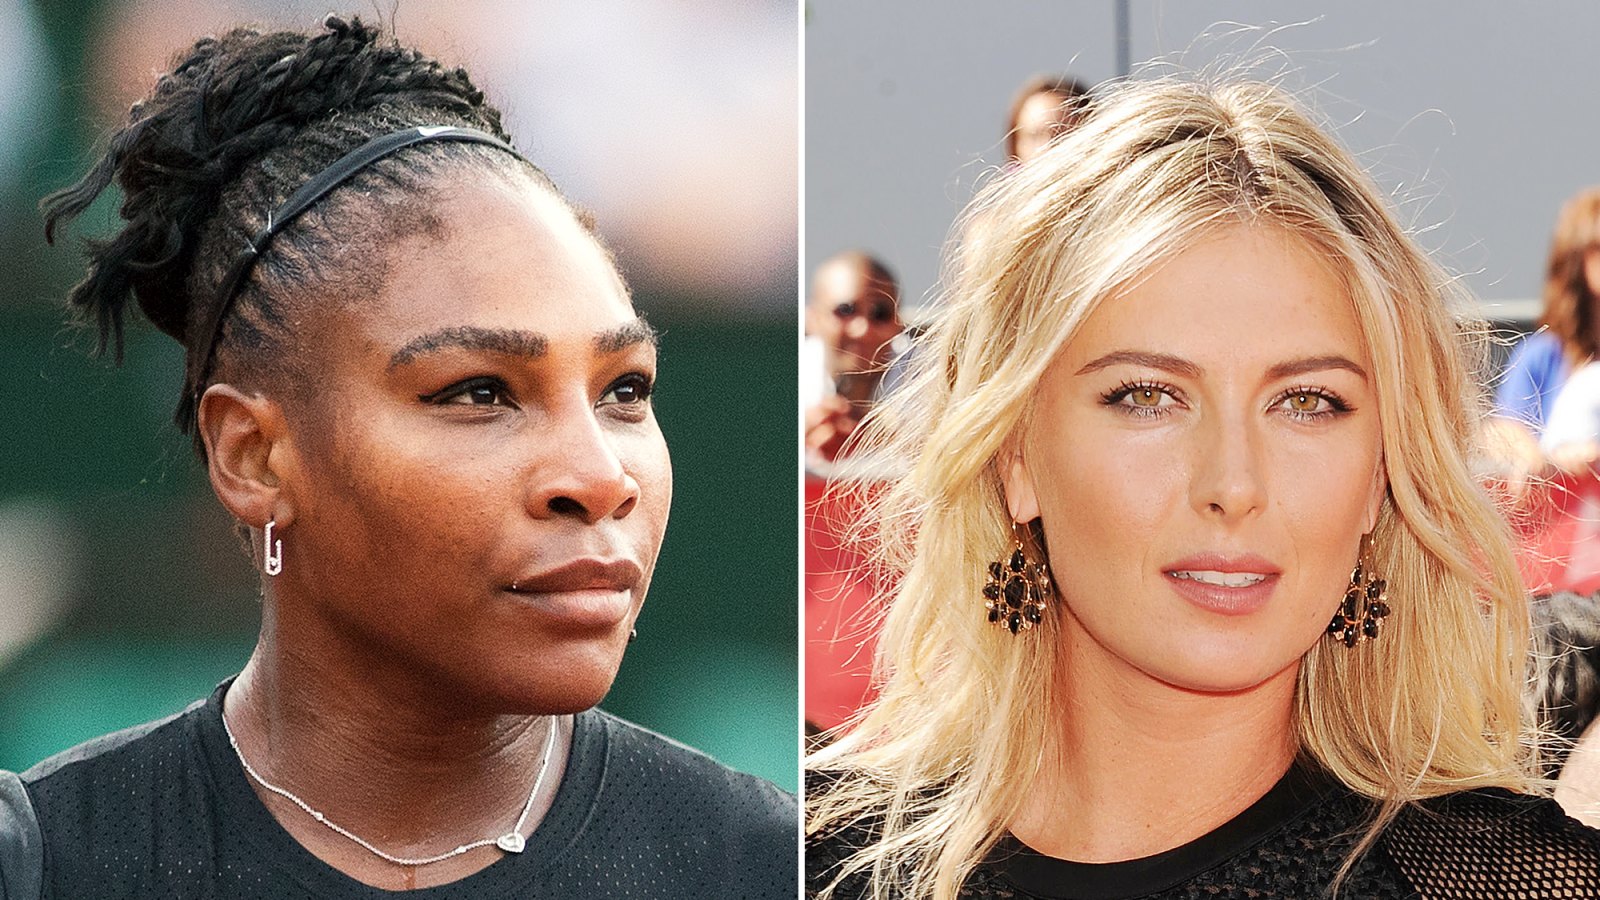 Serena Williams Asked If She's 'Intimidated' by Maria Sharapova's Looks